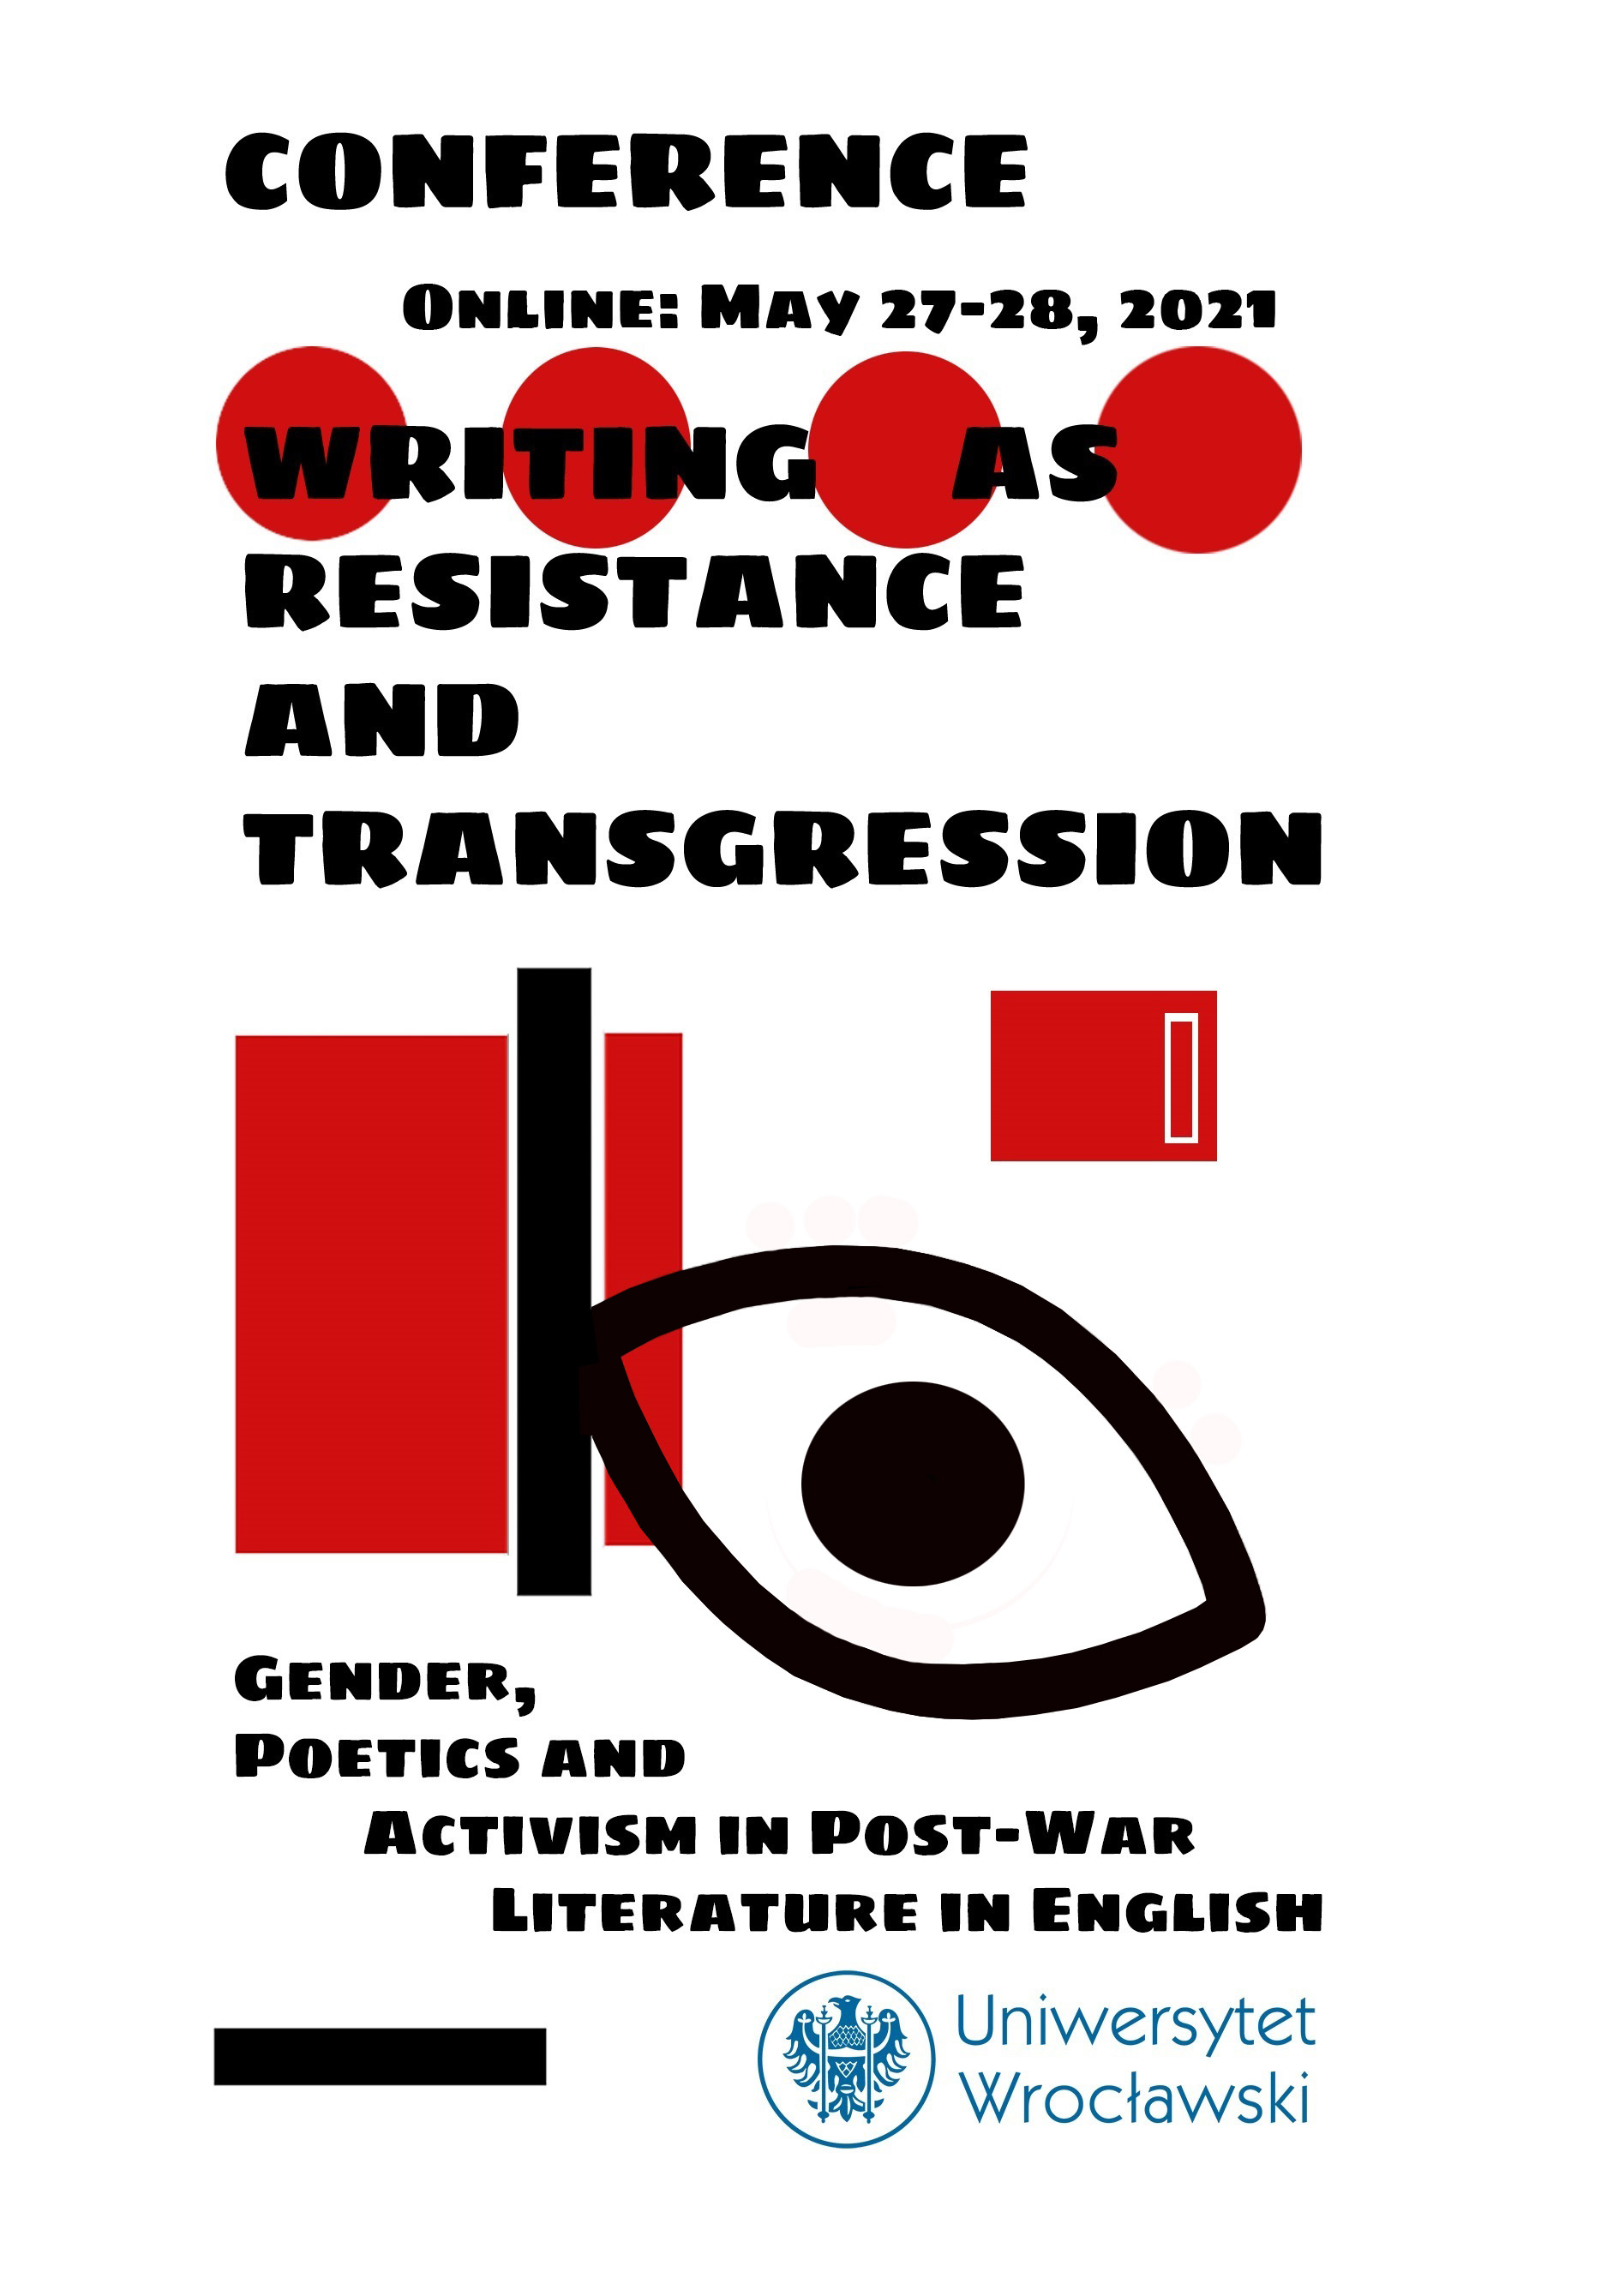 Attachment post-531209-Poster_WritingAsResistance_UWr_IFA_Conference.jpg